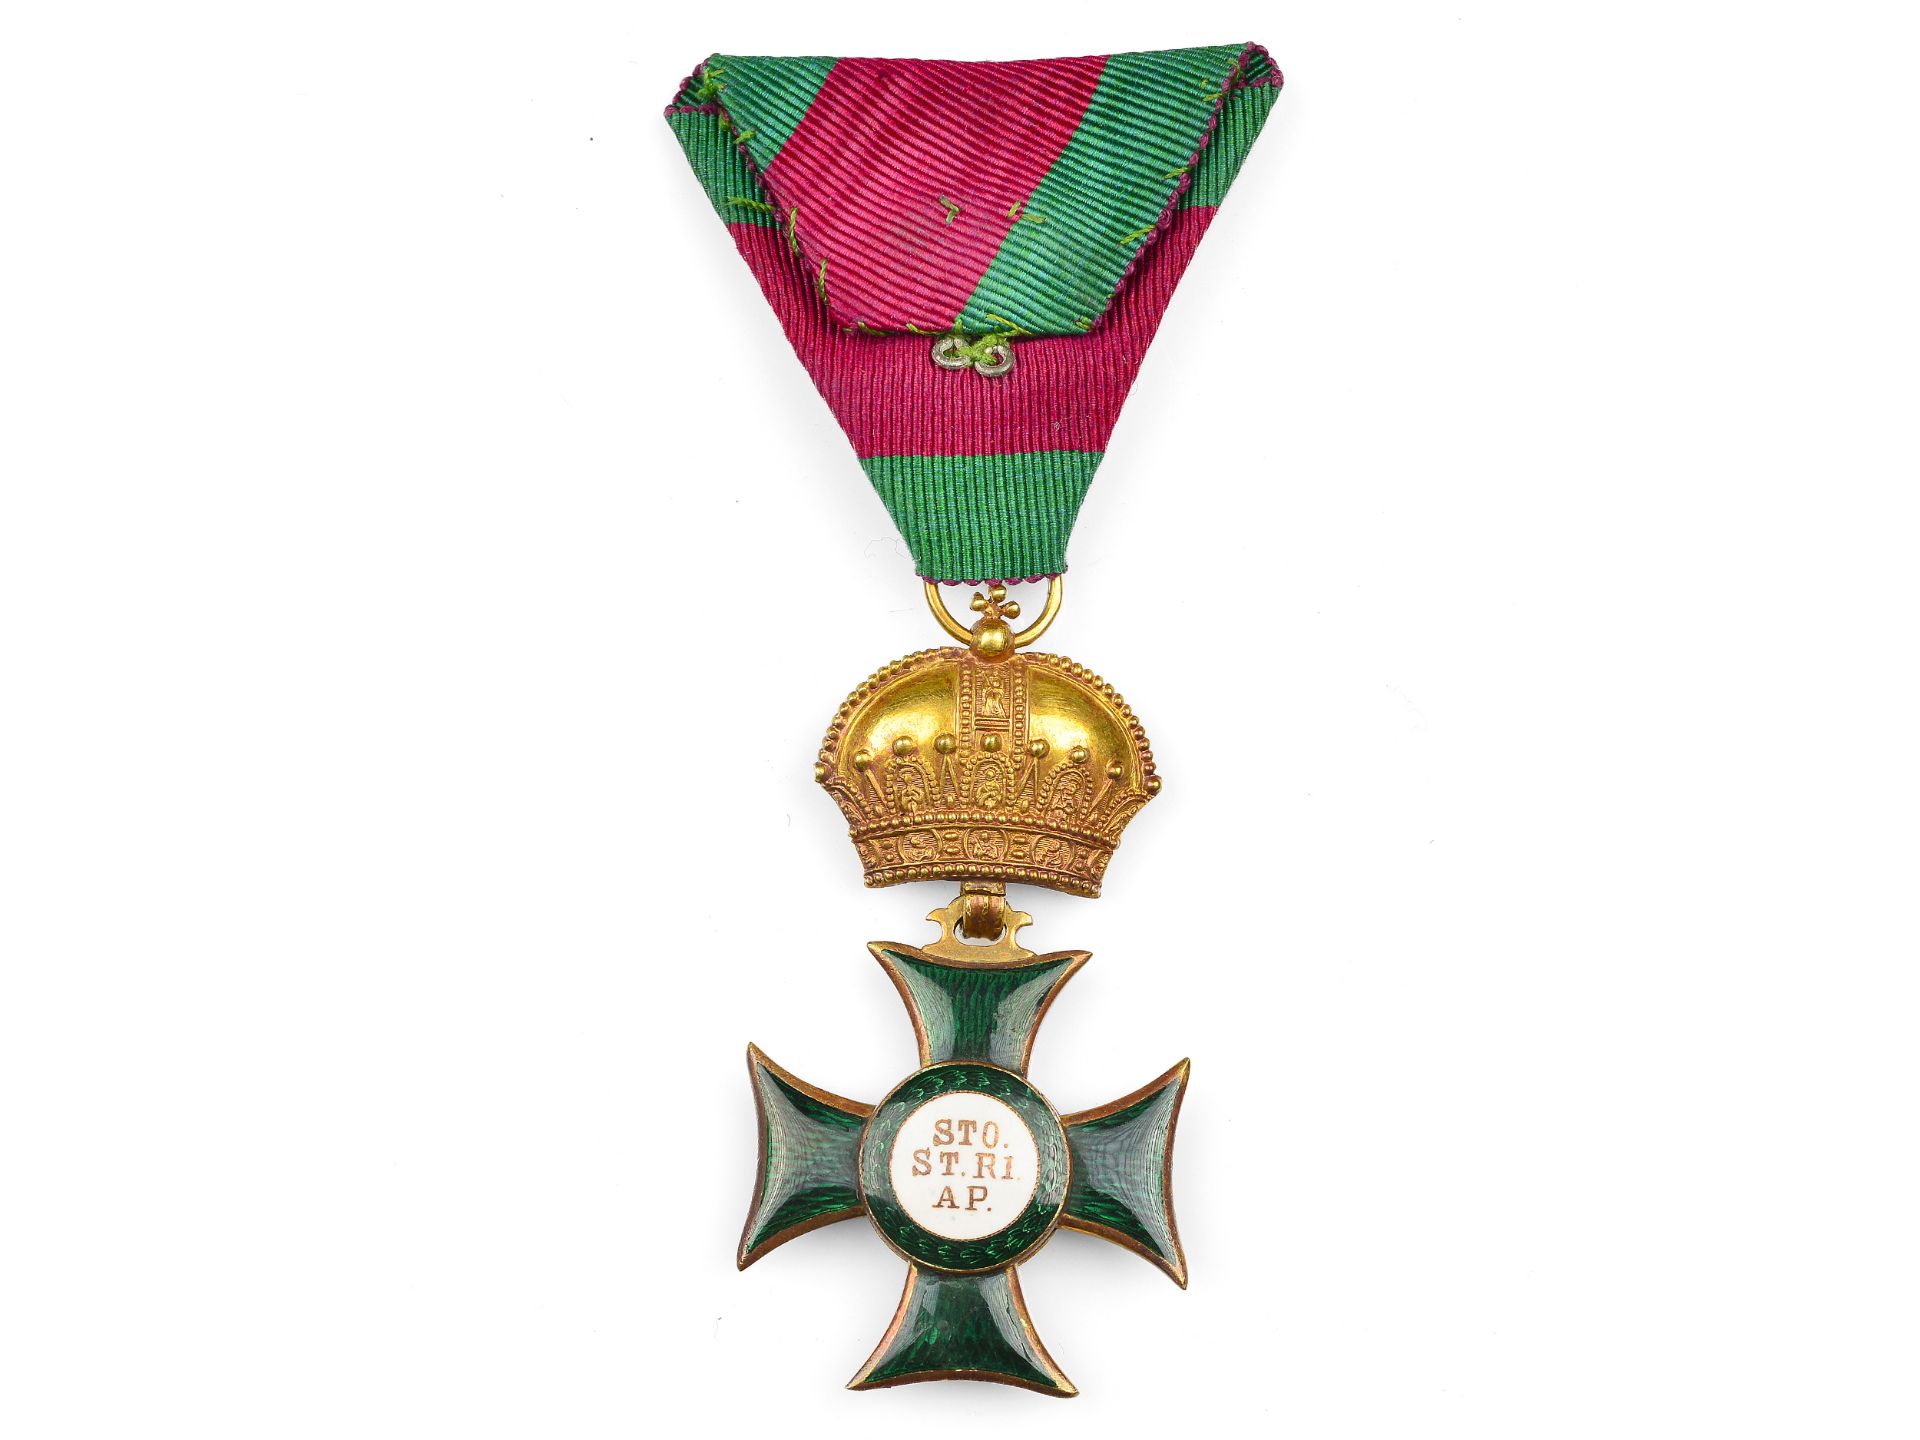 Royal Hungarian Order of St Stephen, founded in 1764, Knight's Cross with triangular ribbon, C. F. R - Image 2 of 2